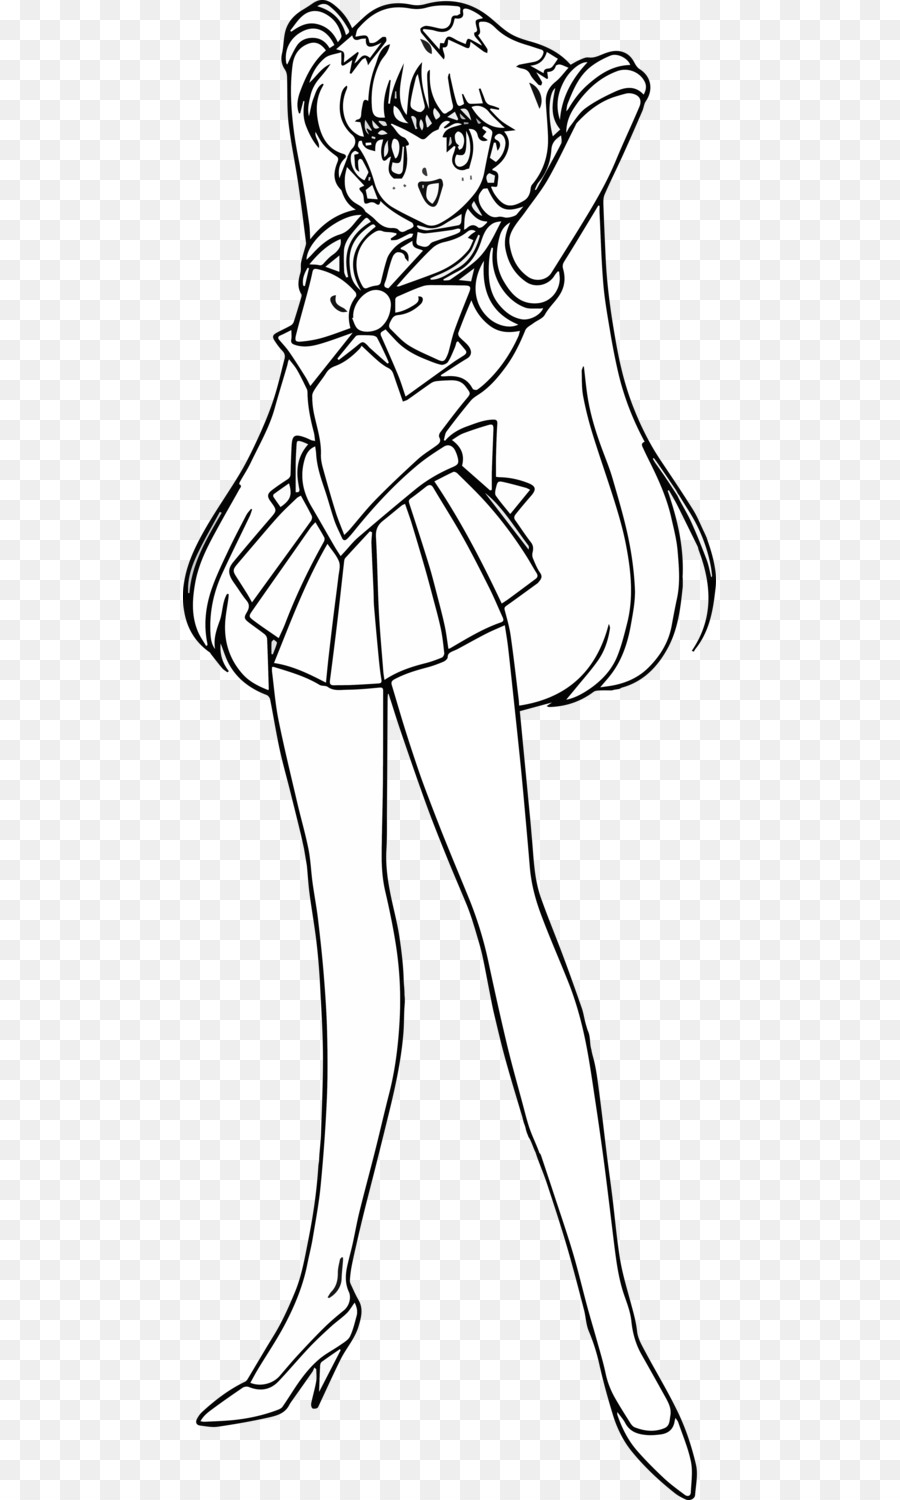 Book Black And White png is about is about Sailor Mars, Sailor Moon, Line A...